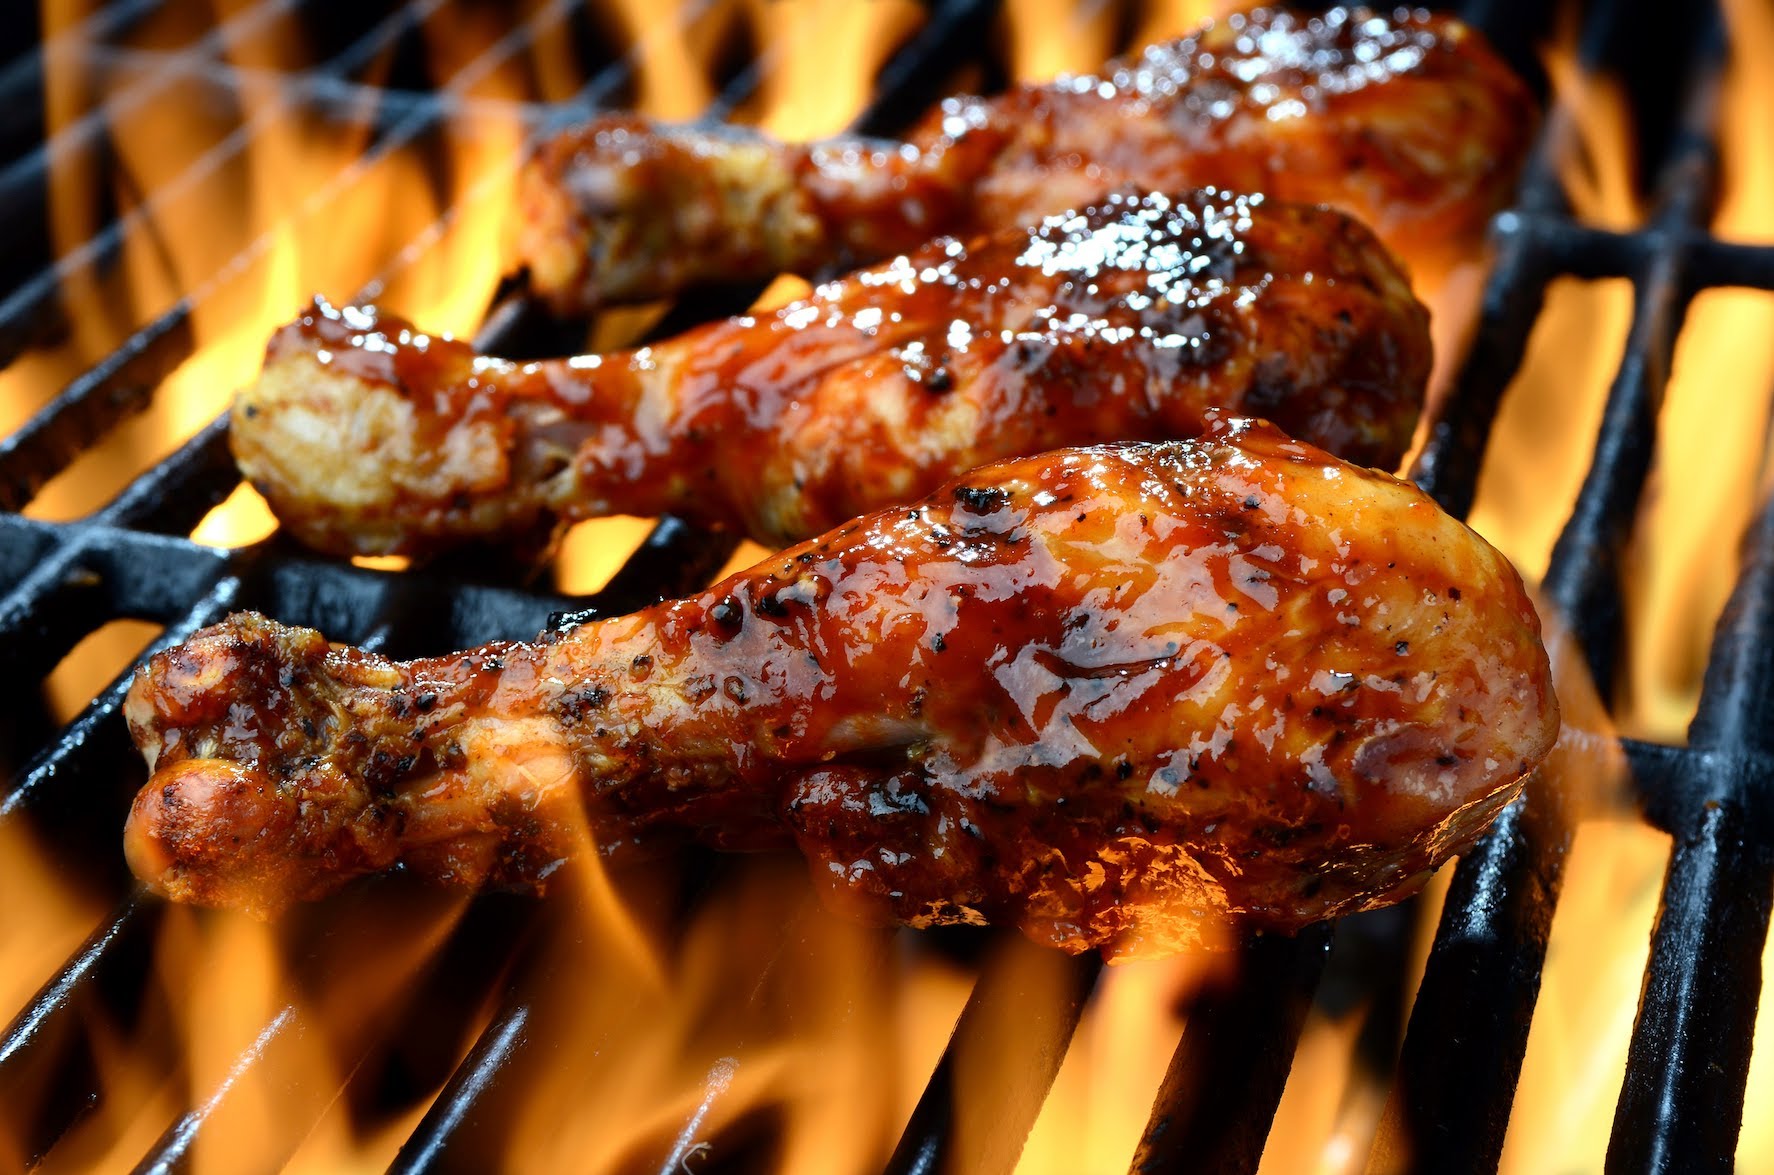 BBQ Chicken with flame.jpg